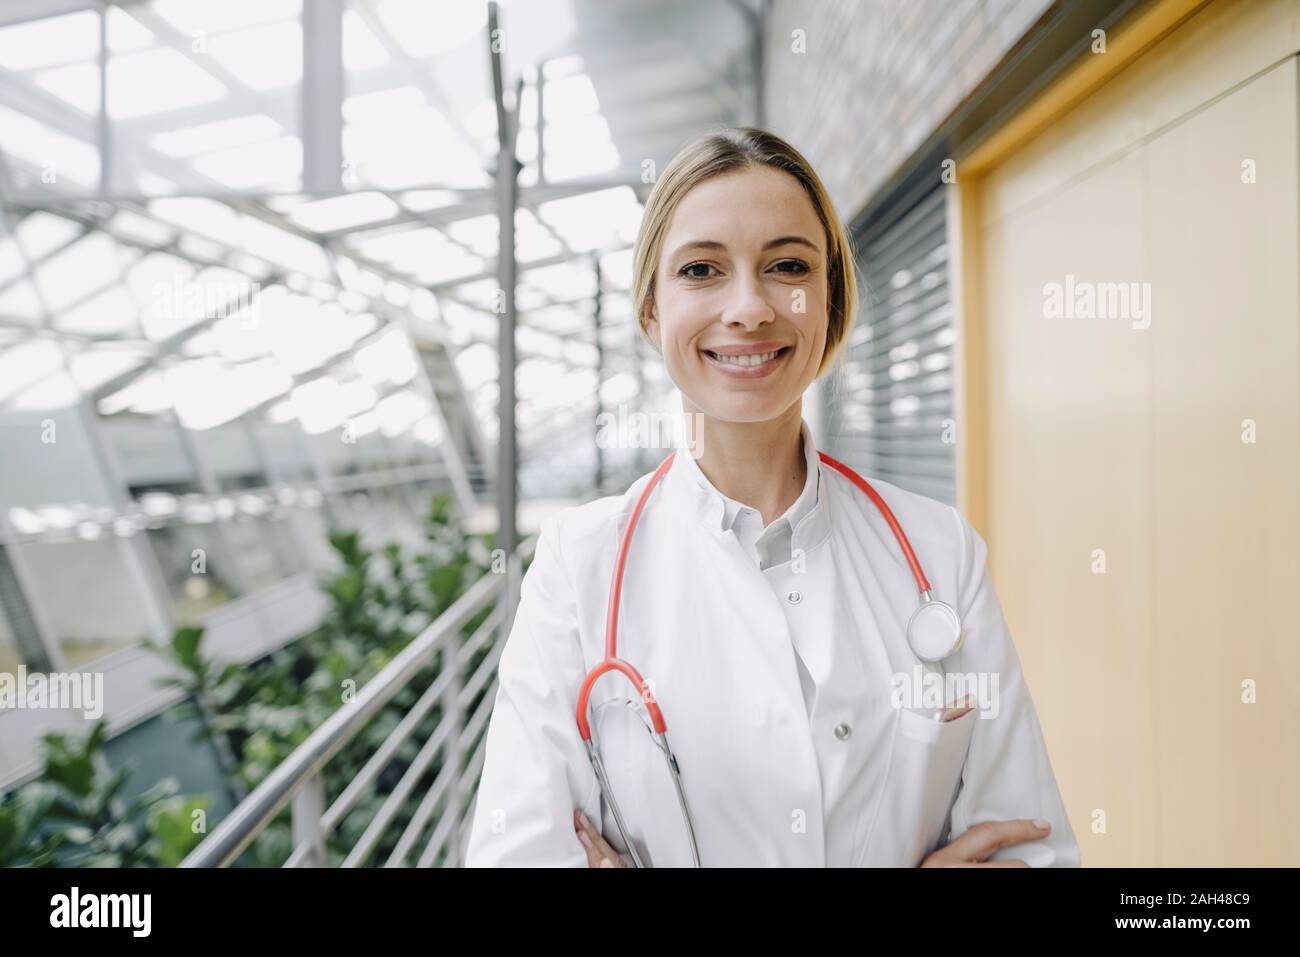 Portrait of a smiling female doctor Stock Photo